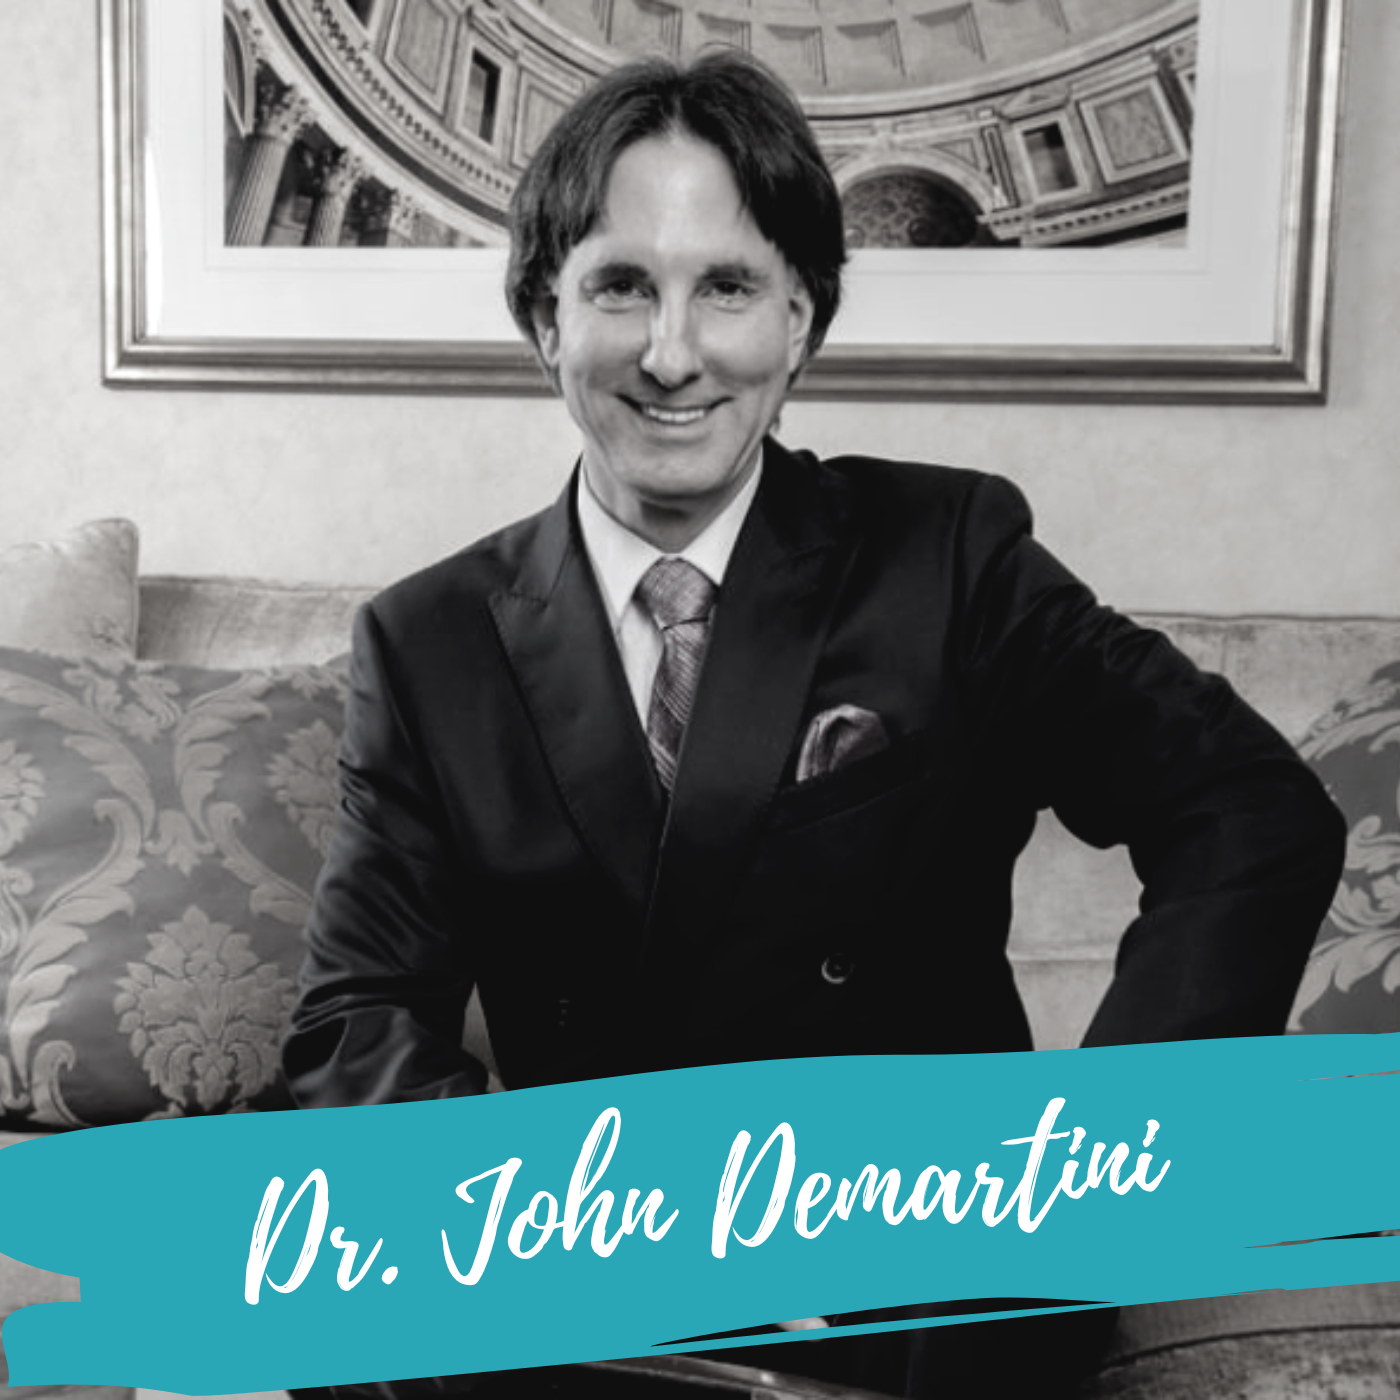 How to Free Yourself From the Fear and Anxiety of the Amygdala – With Dr. John Demartini